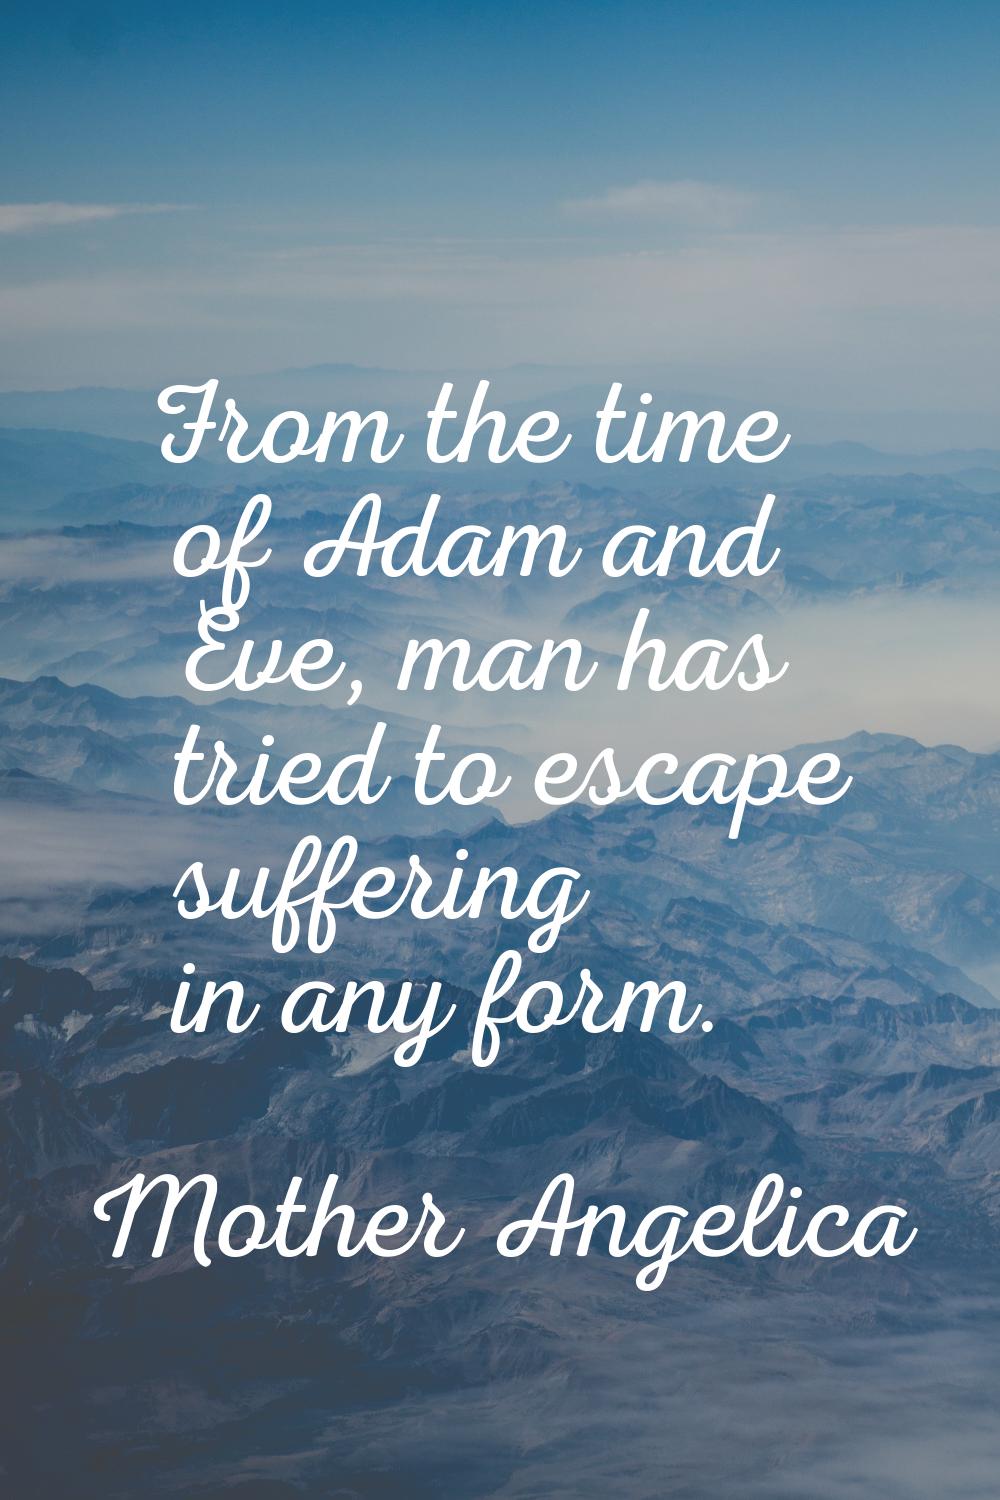 From the time of Adam and Eve, man has tried to escape suffering in any form.